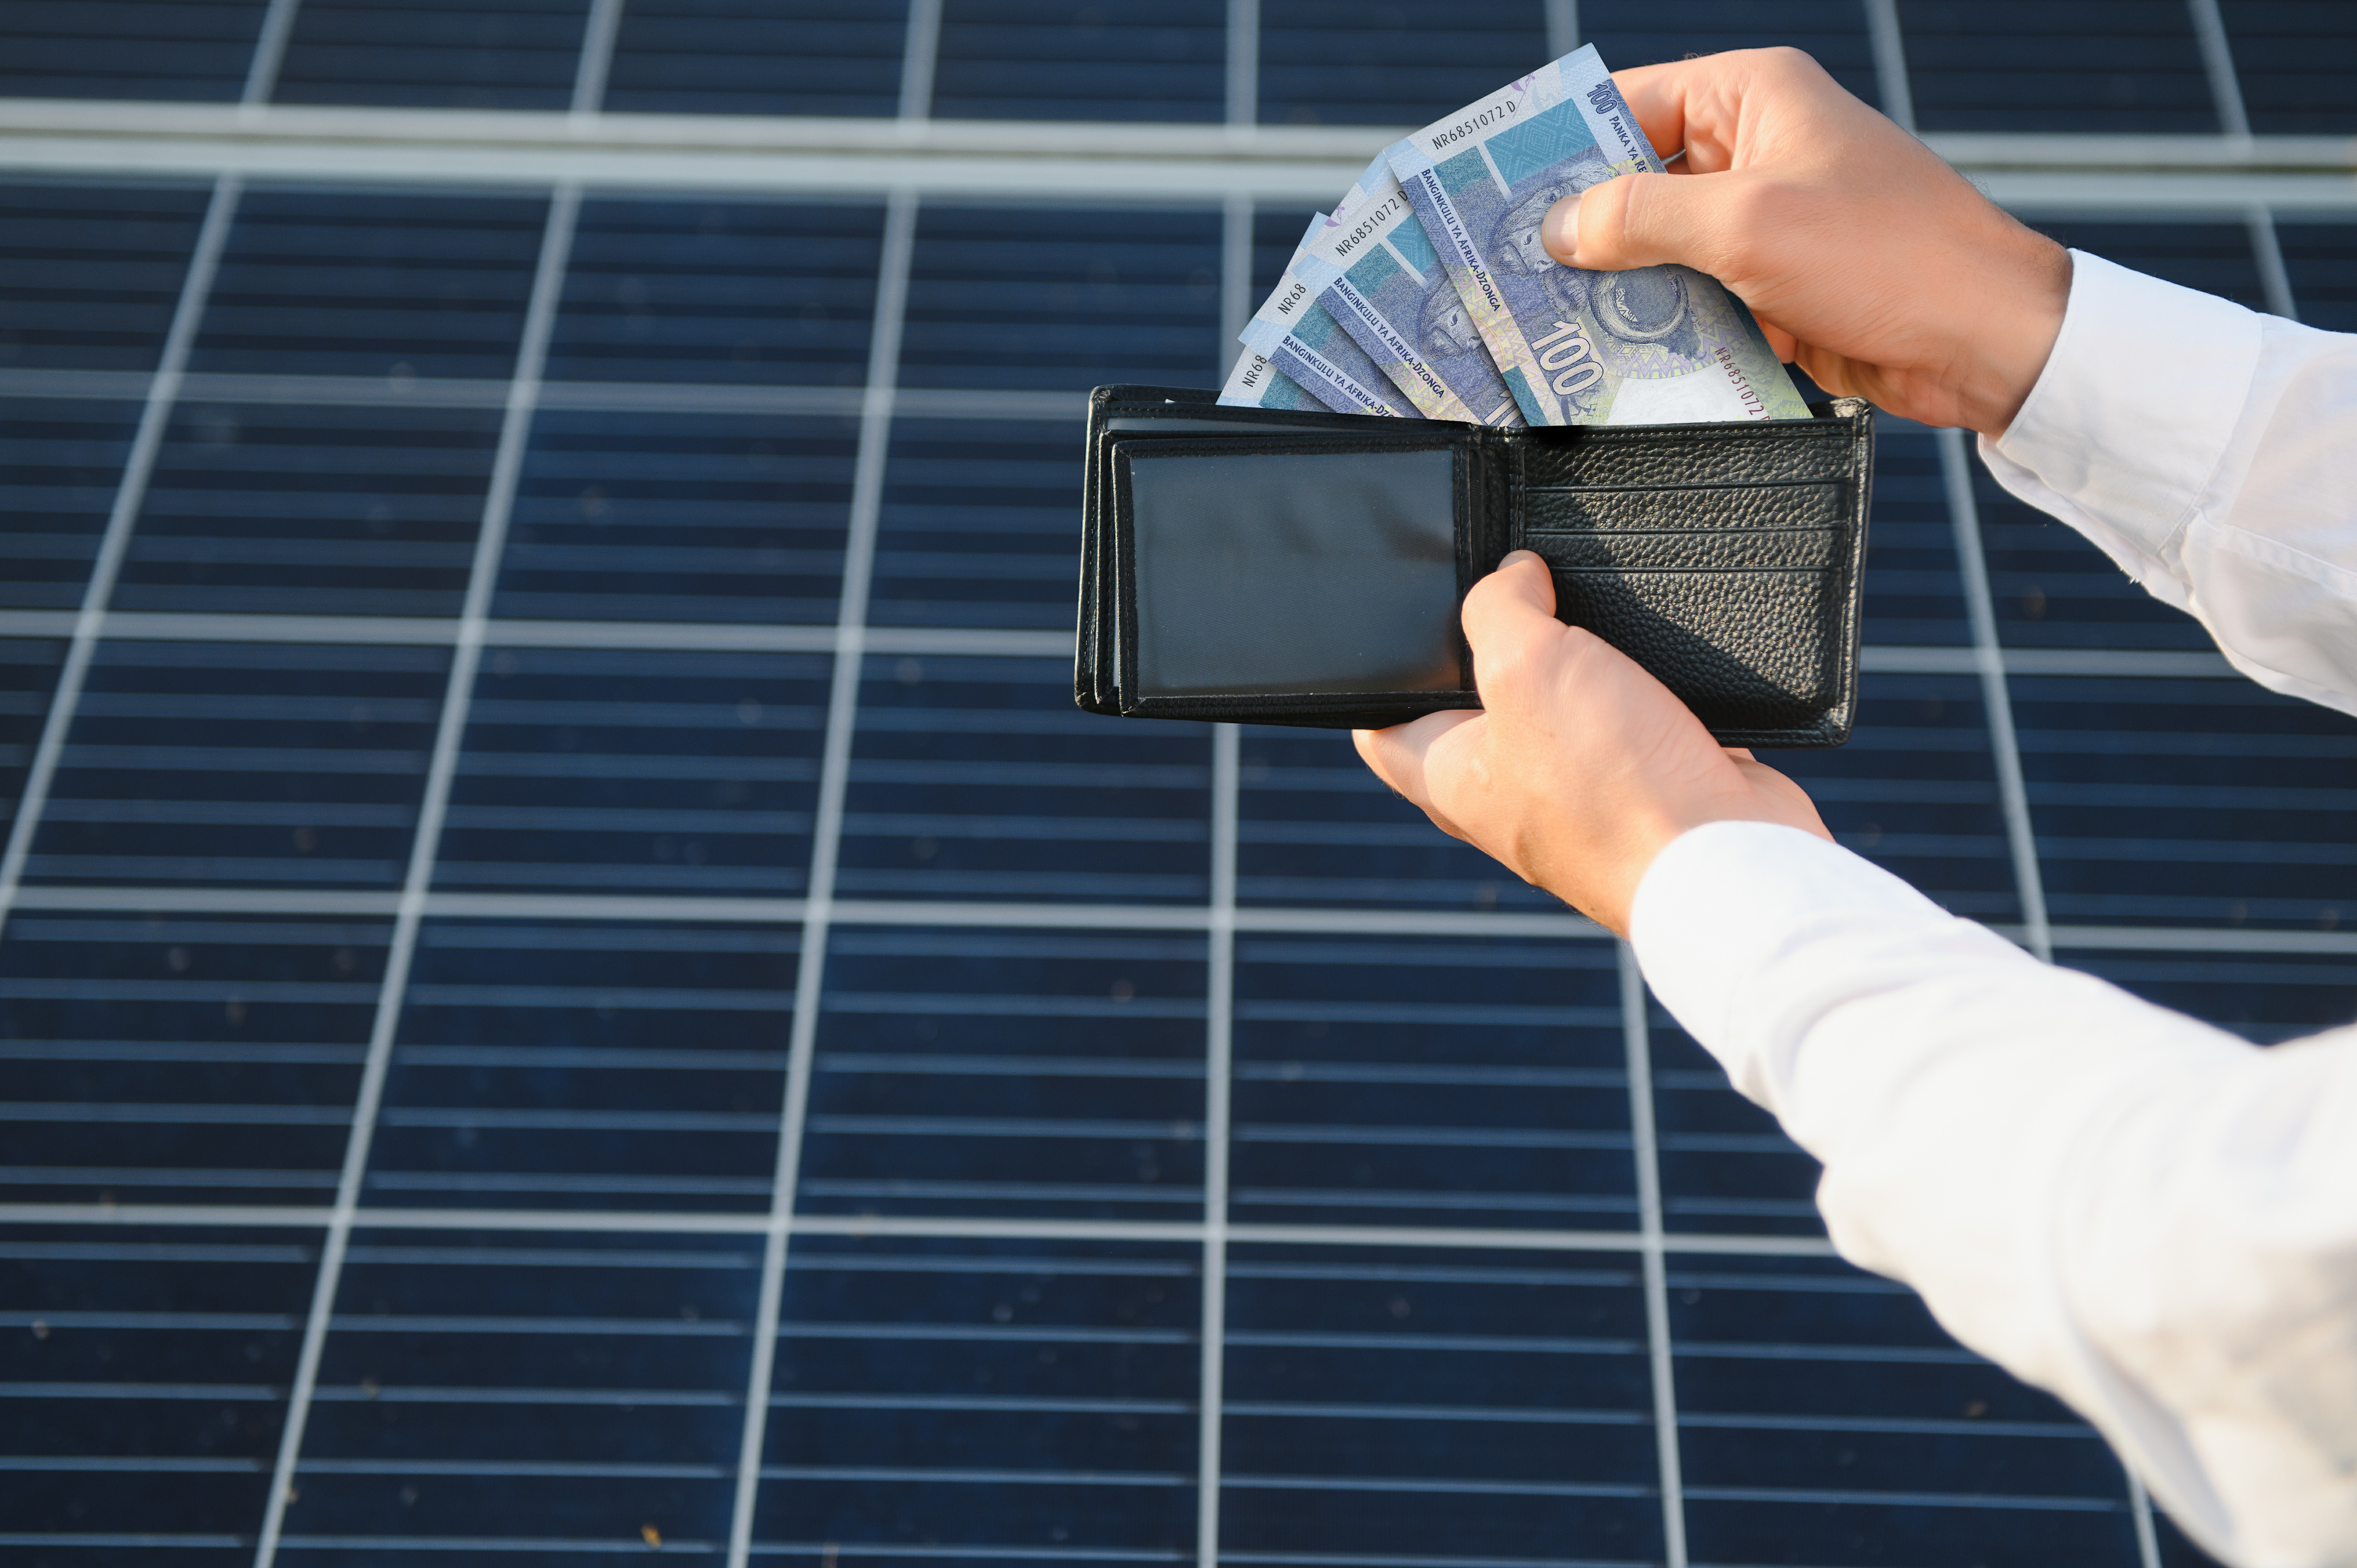 Understanding What Drives a Solar Panel Price for Sustainable Energy